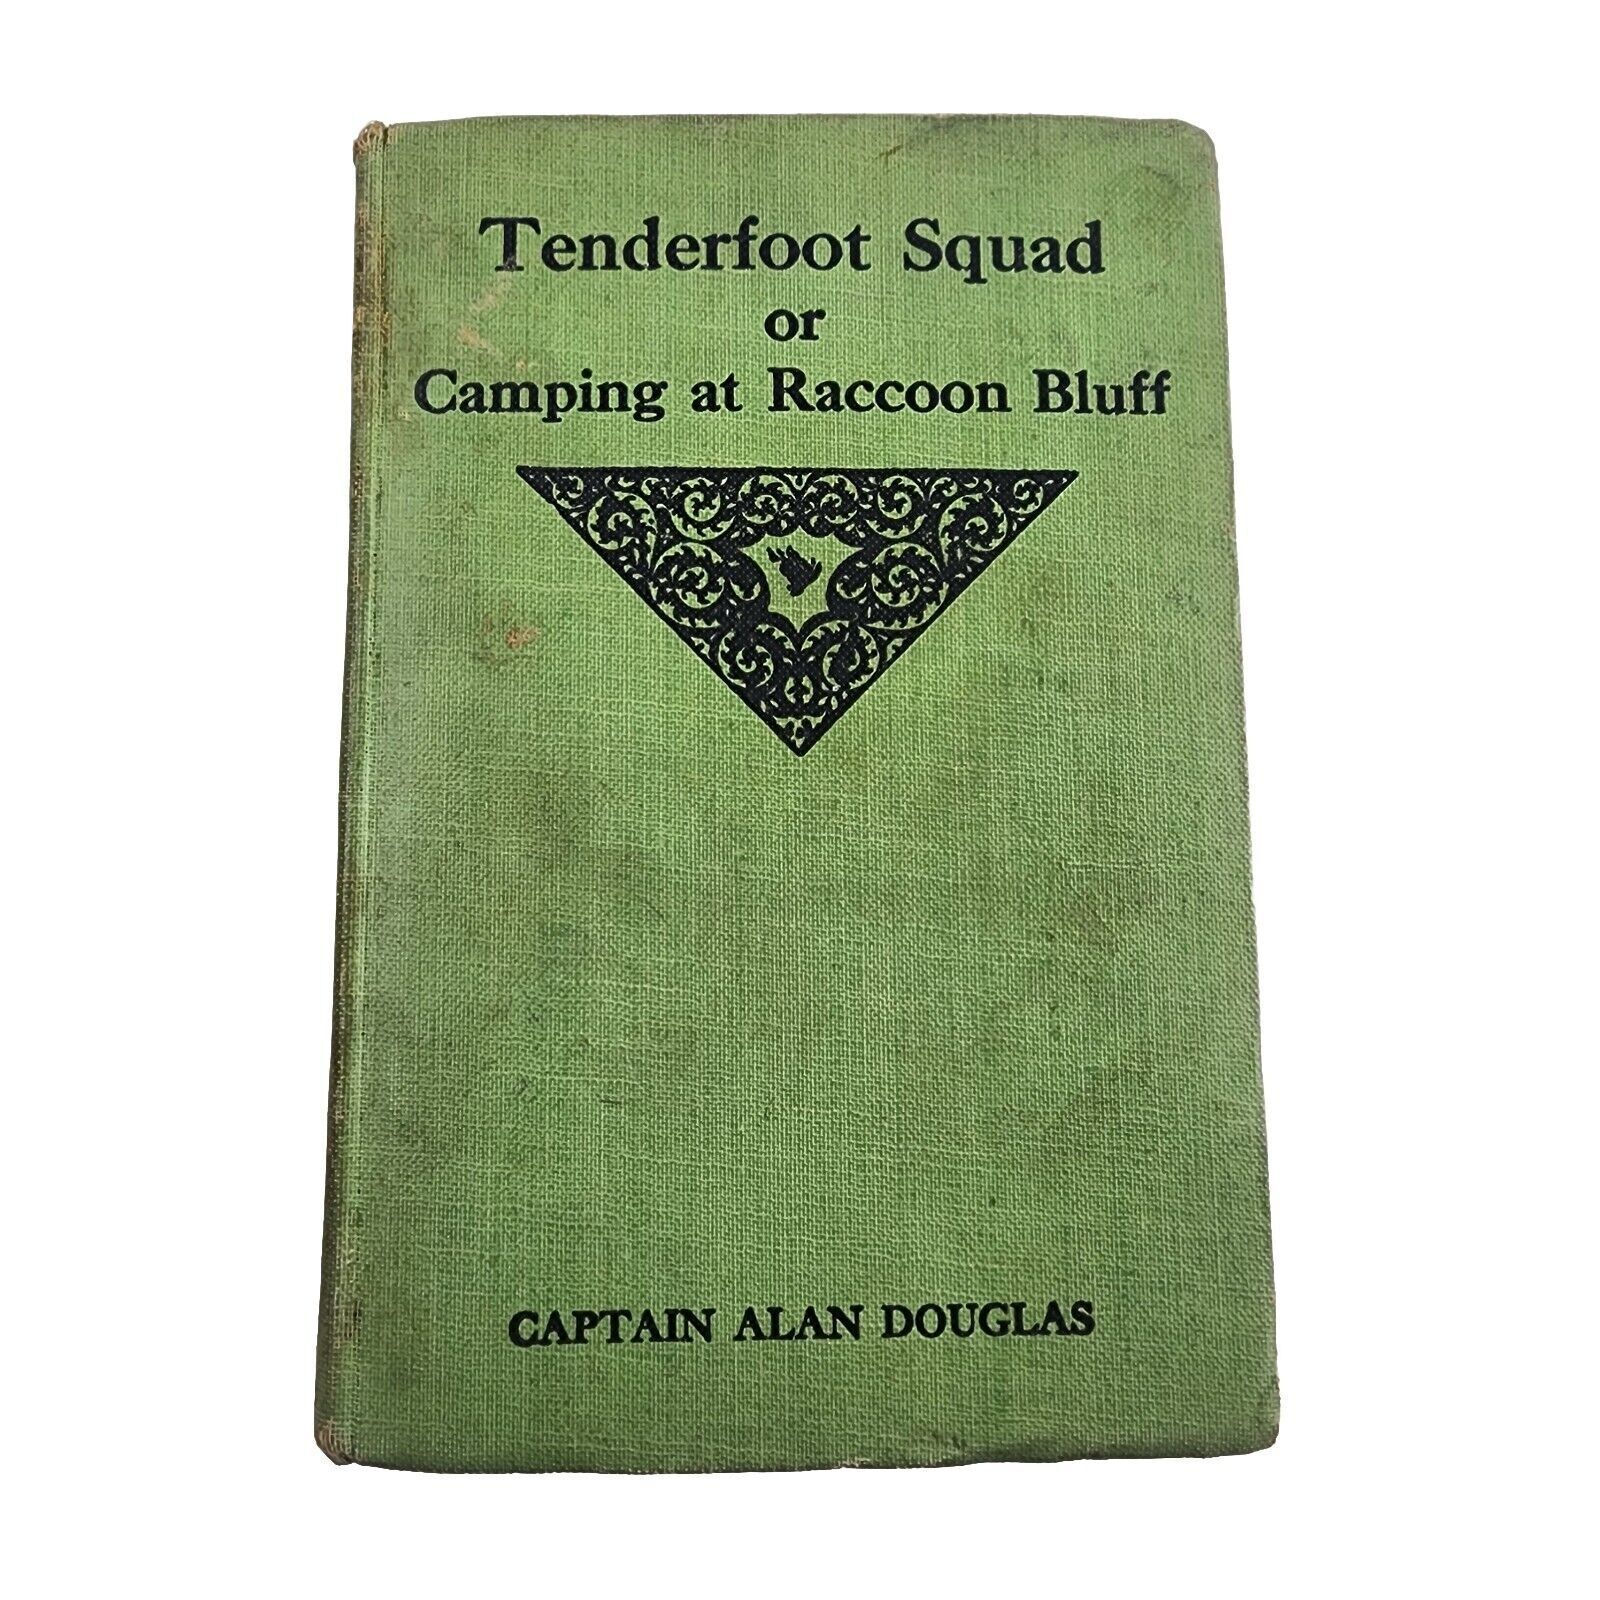 Vintage 1919 Boy Scout Book, Tenderfoot Squad or Camping at Raccoon Bluff